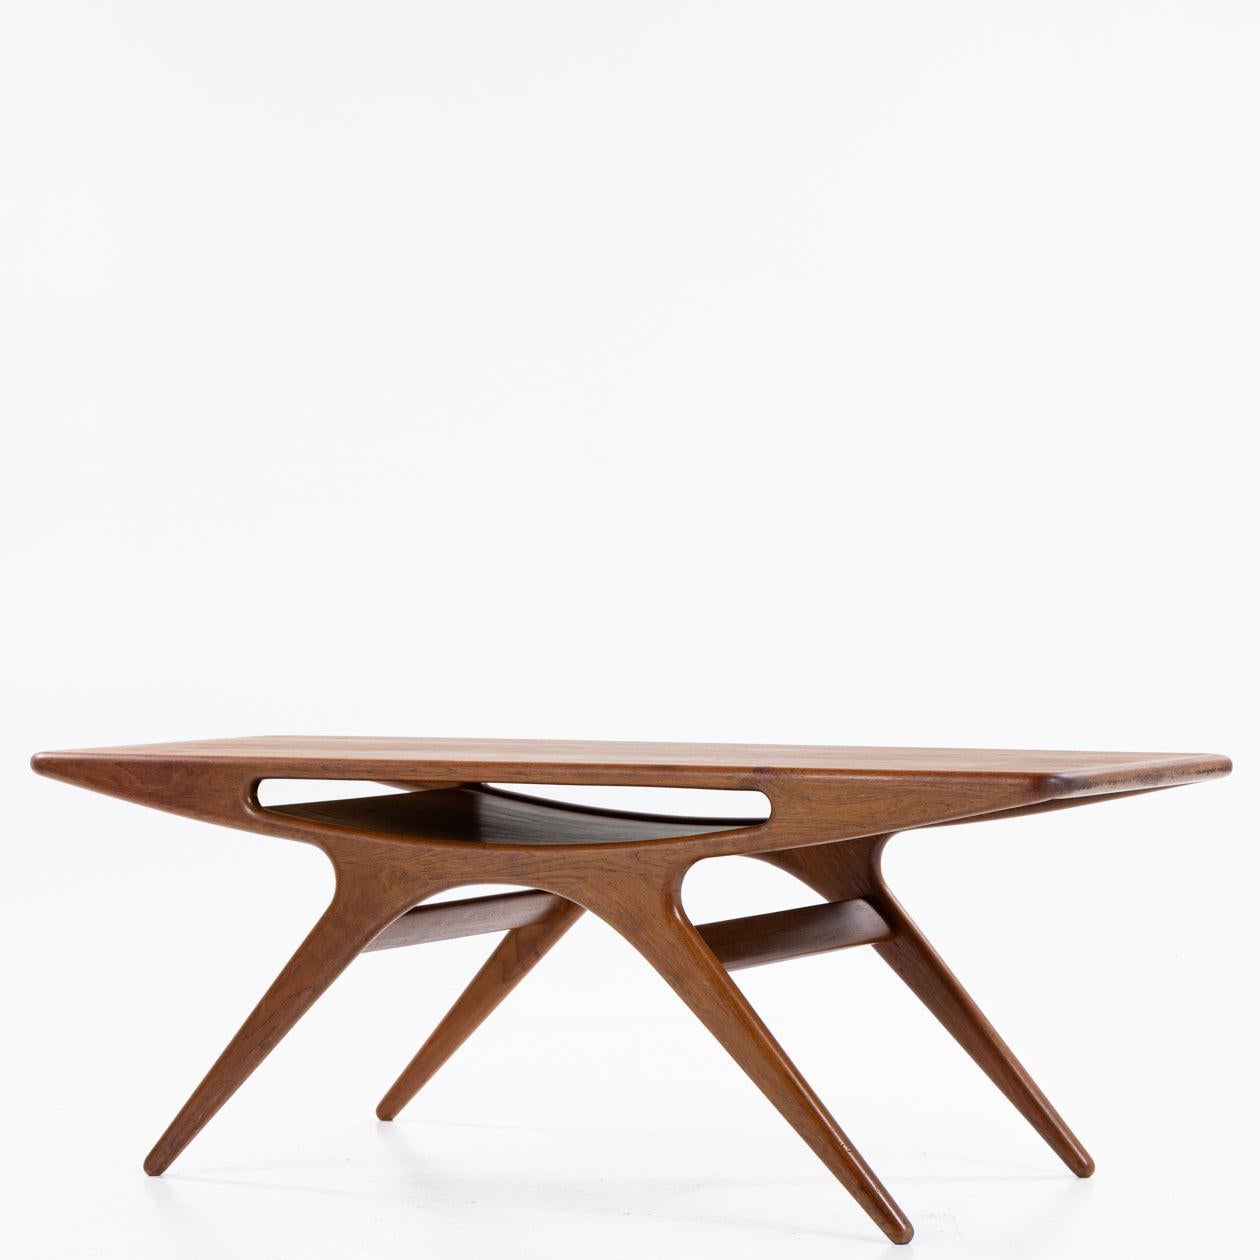 ’The Smile' coffee table in teak.
Manufactered by CFC Silkeborg